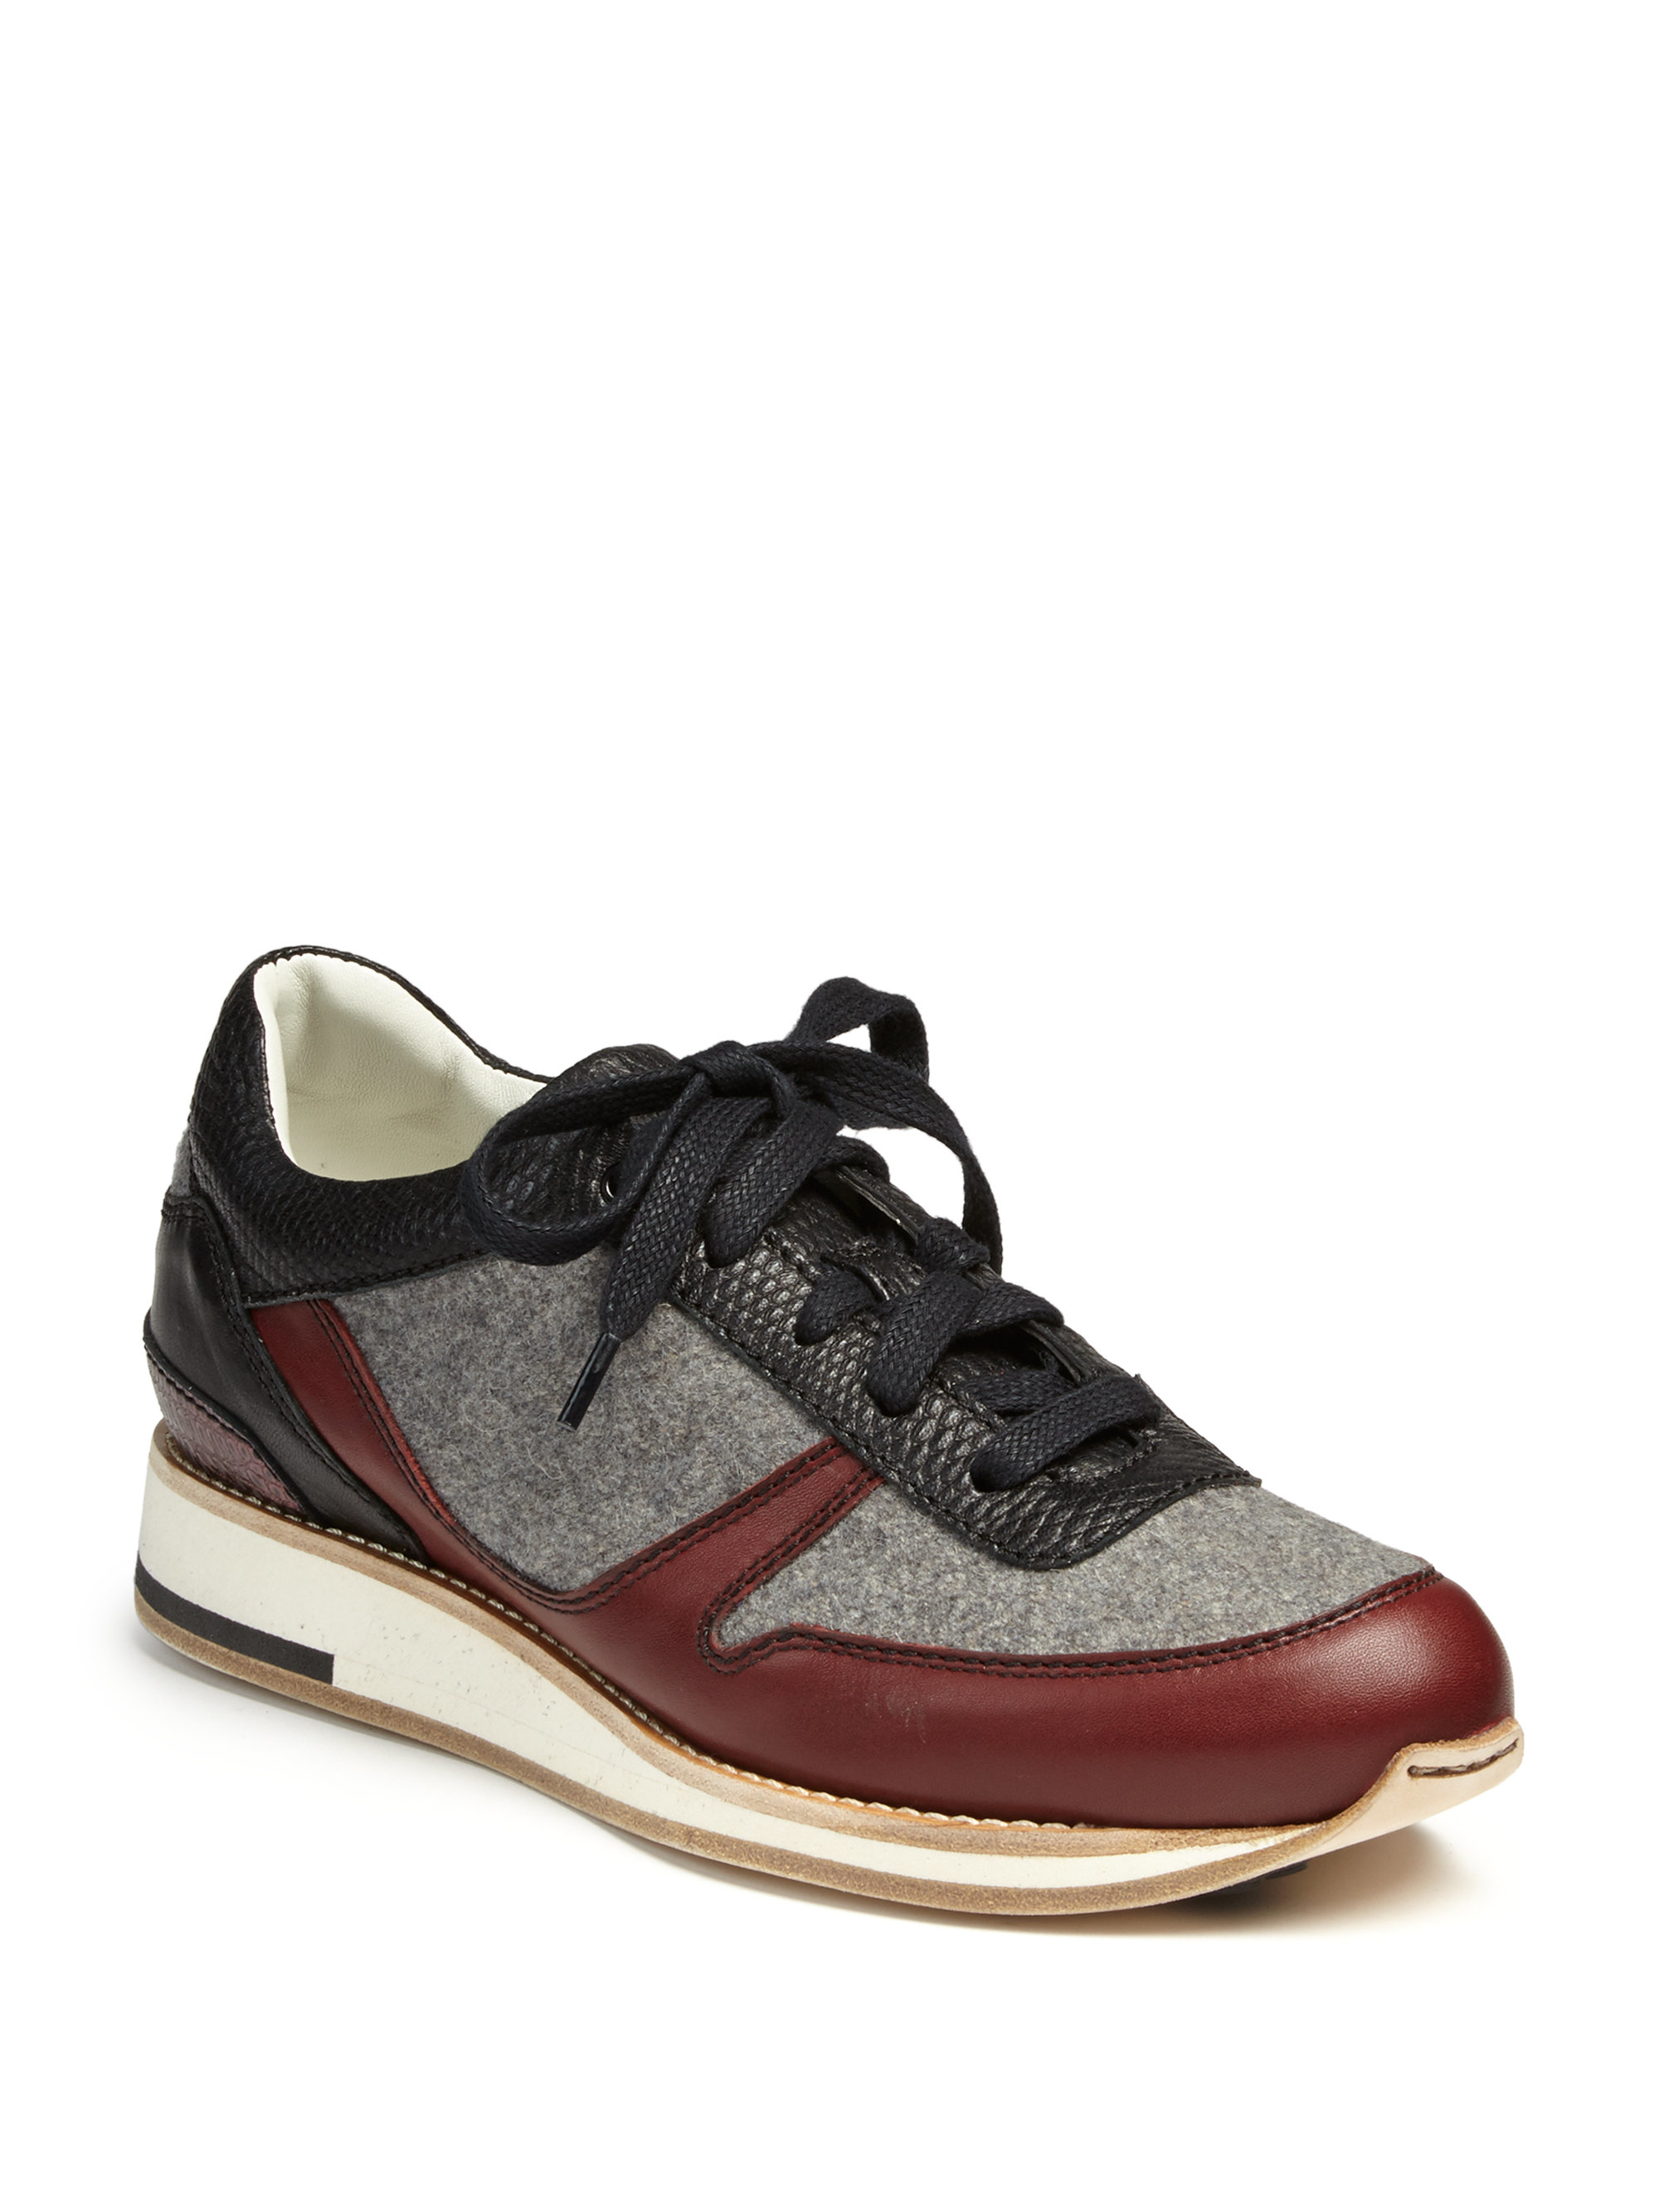 Lyst - Lanvin Leather and Felt Low-Top Running Sneakers in Gray